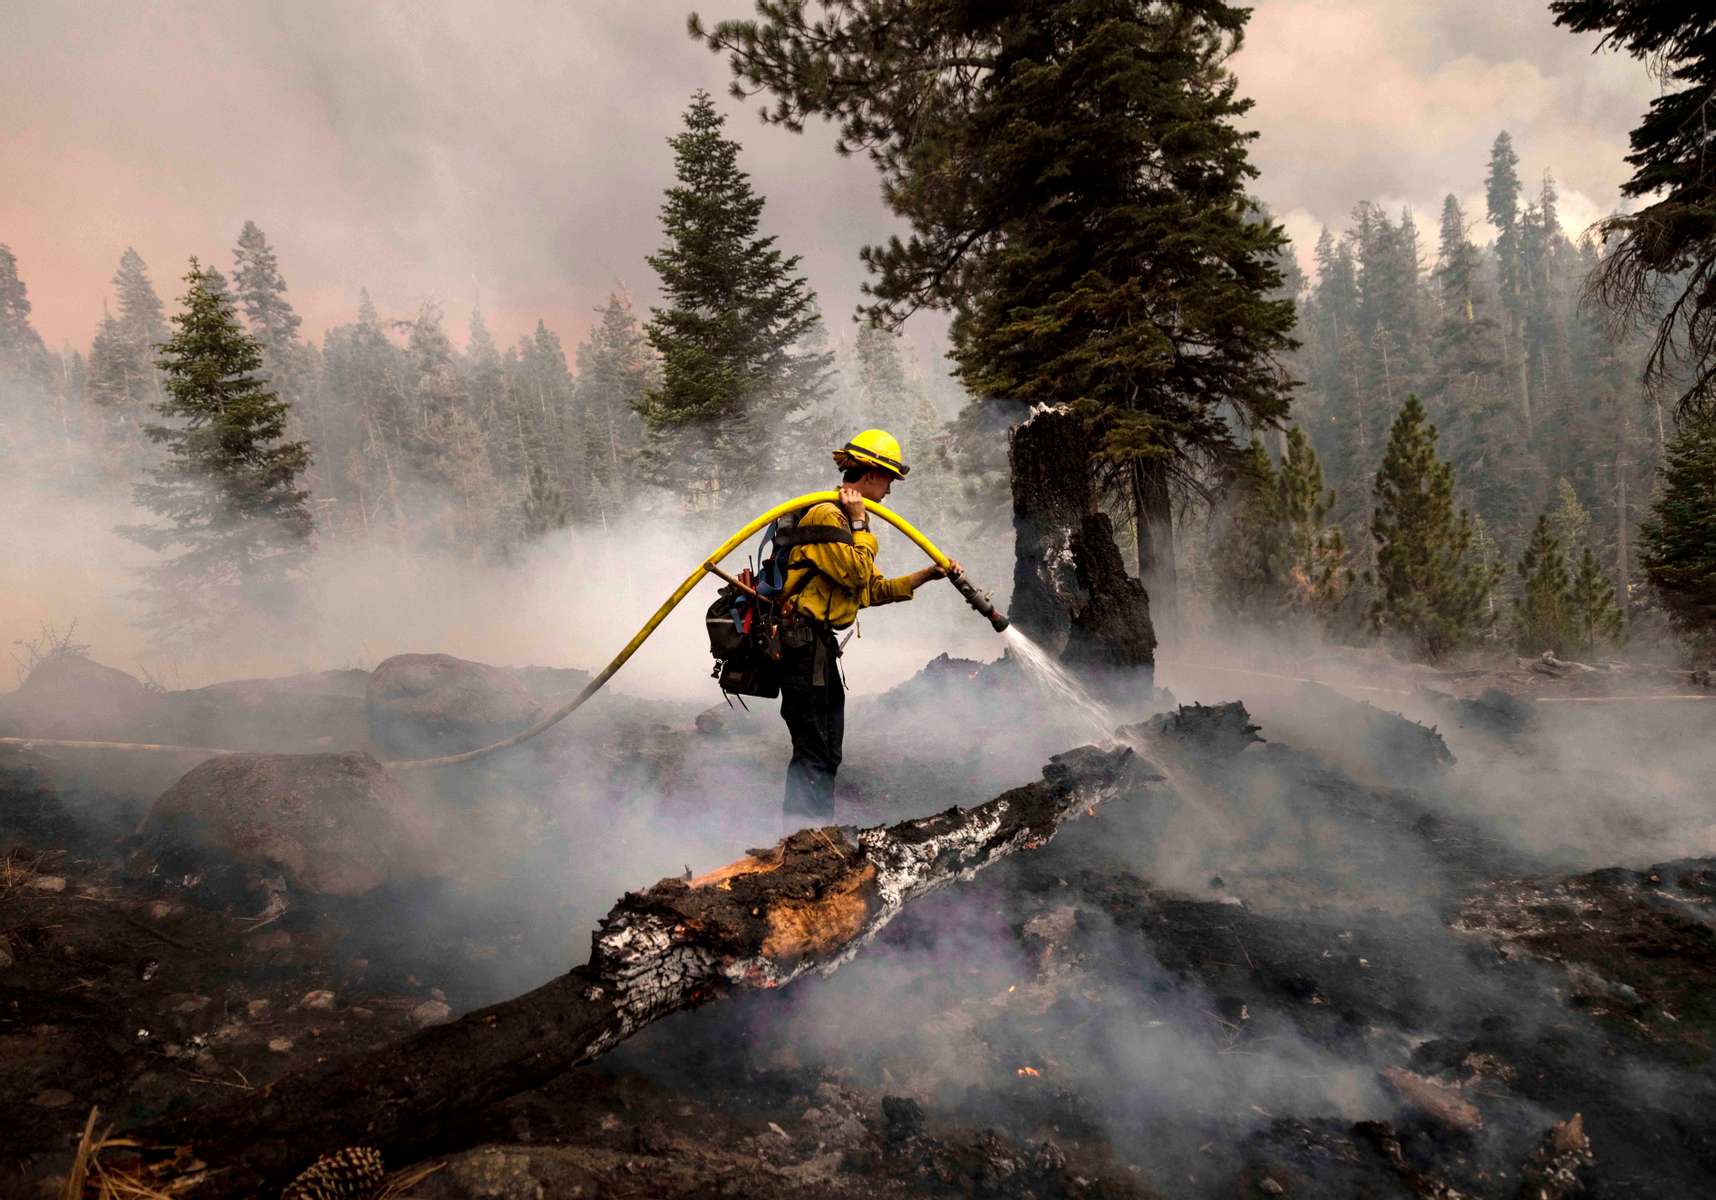 Firefighters work to control the Caldor fire on August 29, 2021, in the Eldorado National forest, California. The Caldor Fire has burned over 165,000 acres, destroyed over 660 structures and is currently 14 percent contained. 